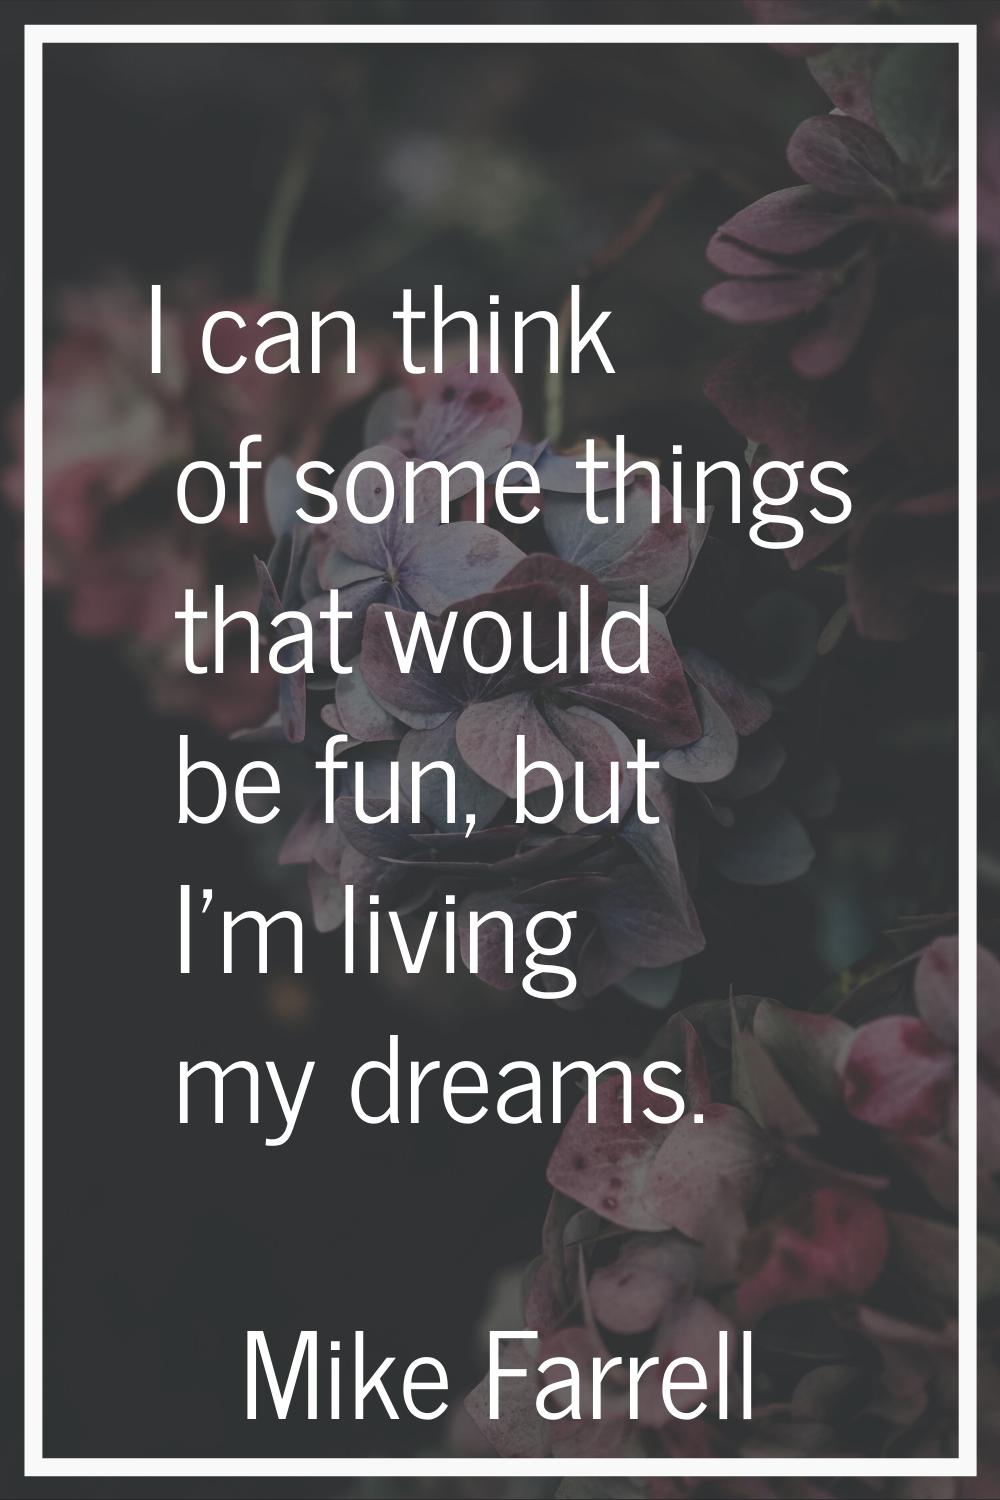 I can think of some things that would be fun, but I'm living my dreams.